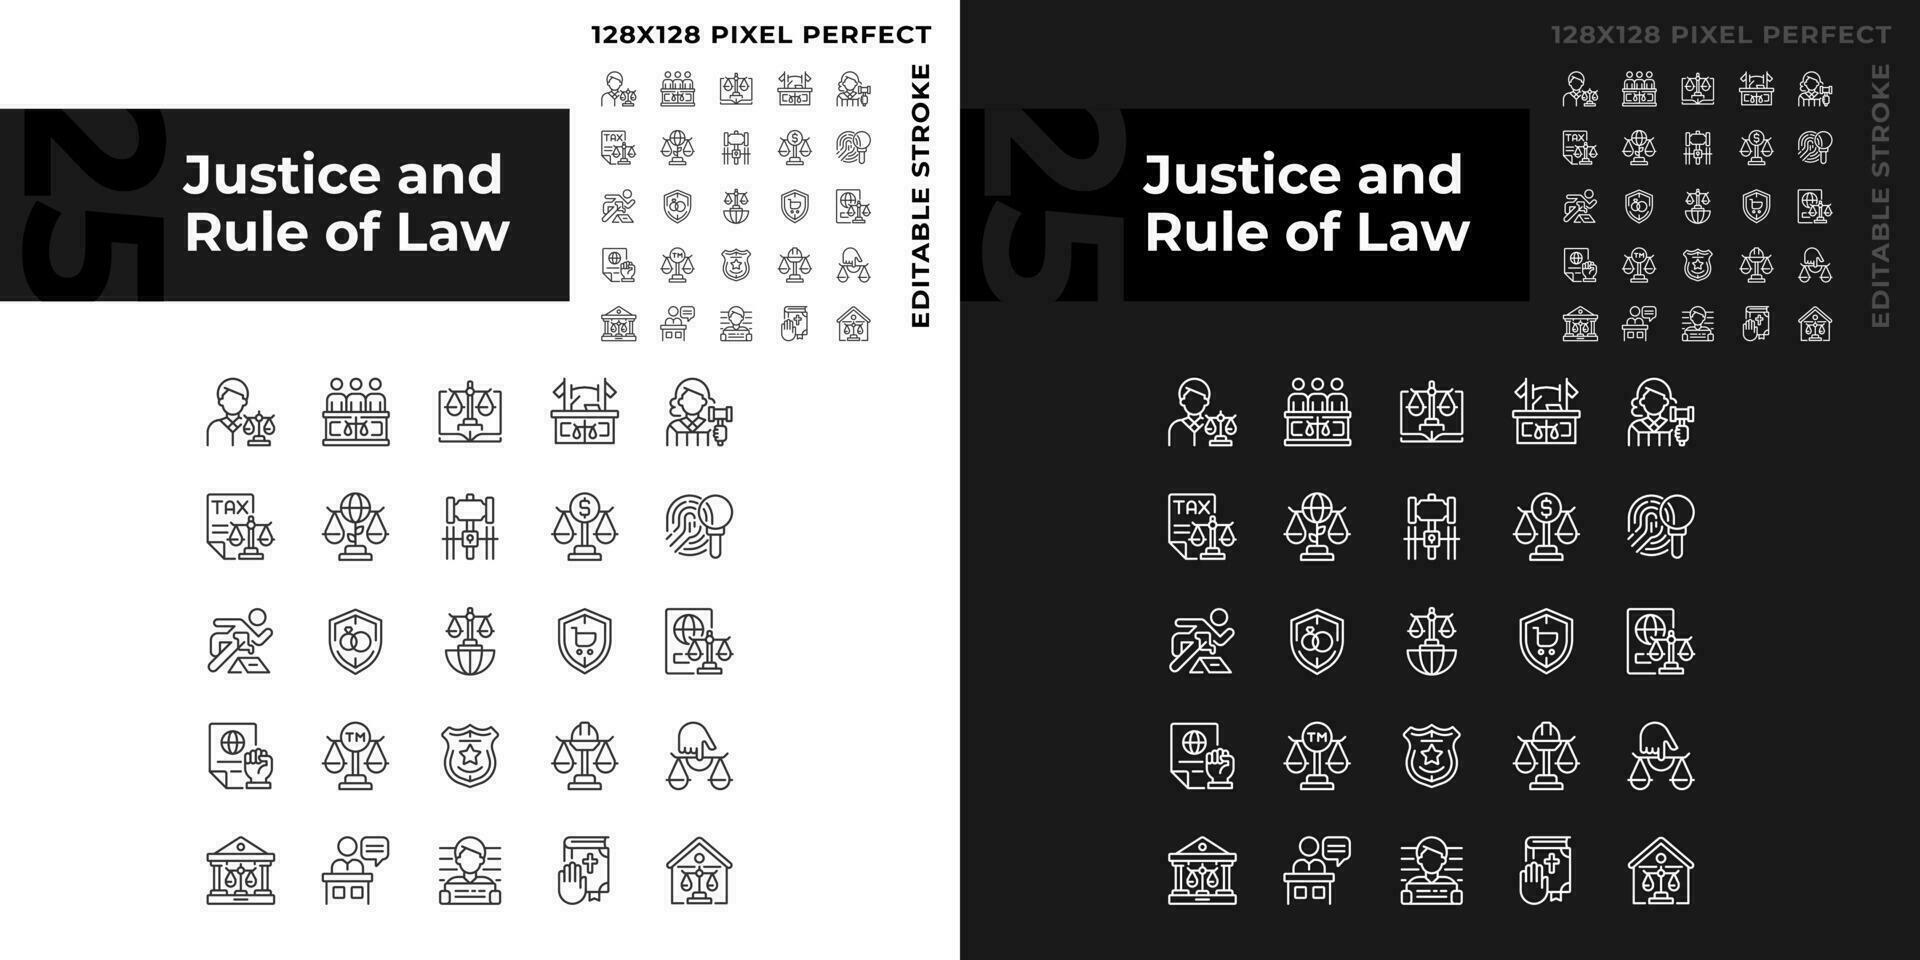 Justice and rule of law pixel perfect linear icons set for dark, light mode. Government system of regulation. Thin line symbols for night, day theme. Isolated illustrations. Editable stroke vector